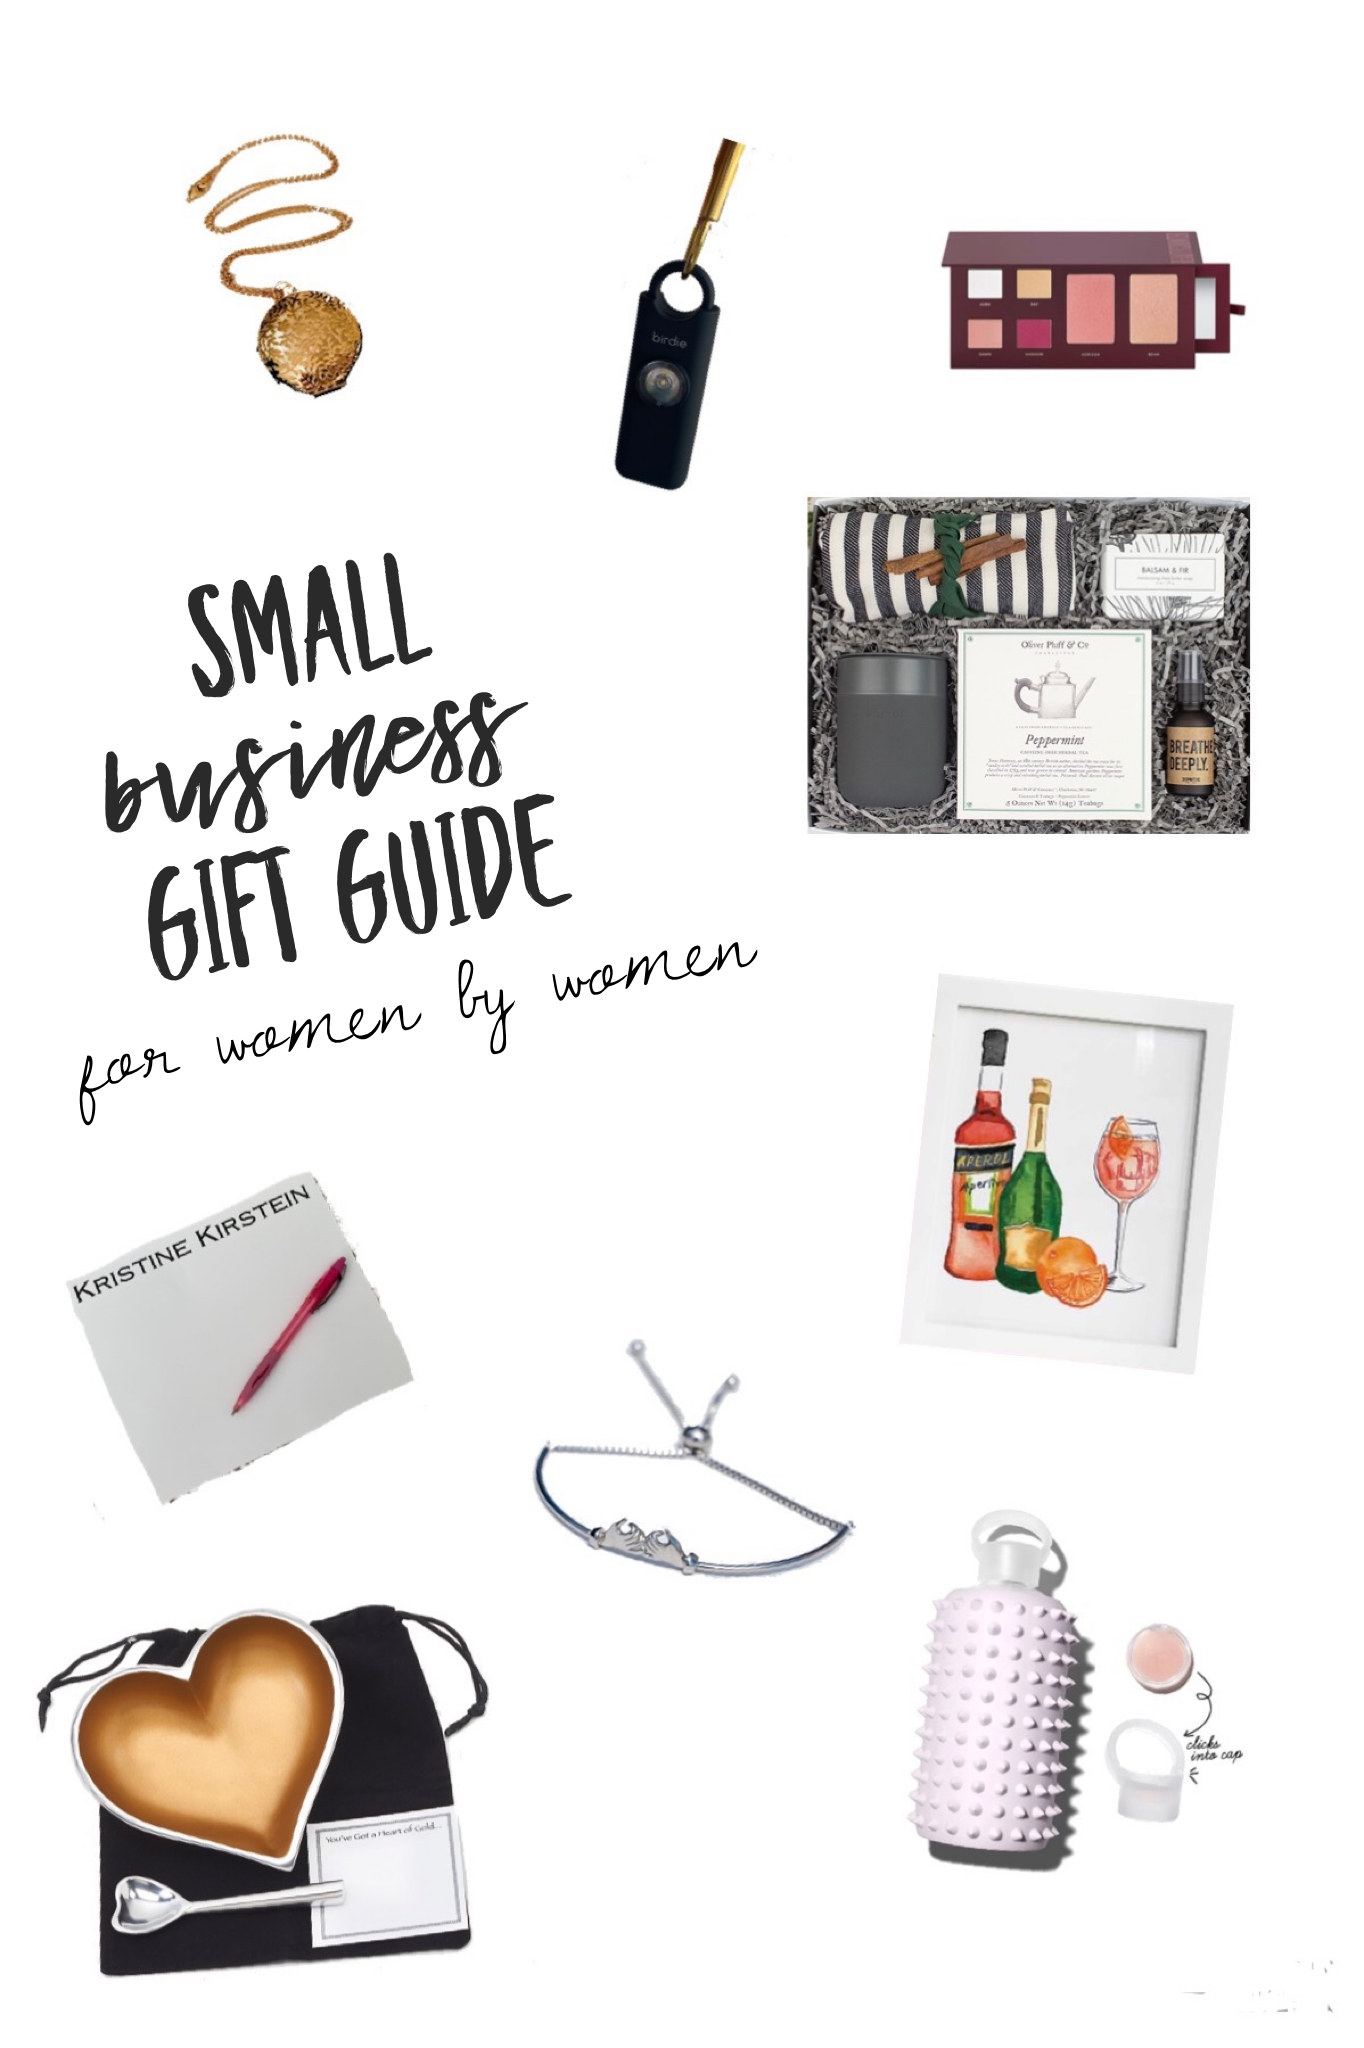 Small Business Gift Guide for Women by Women! Kristine Kirstein